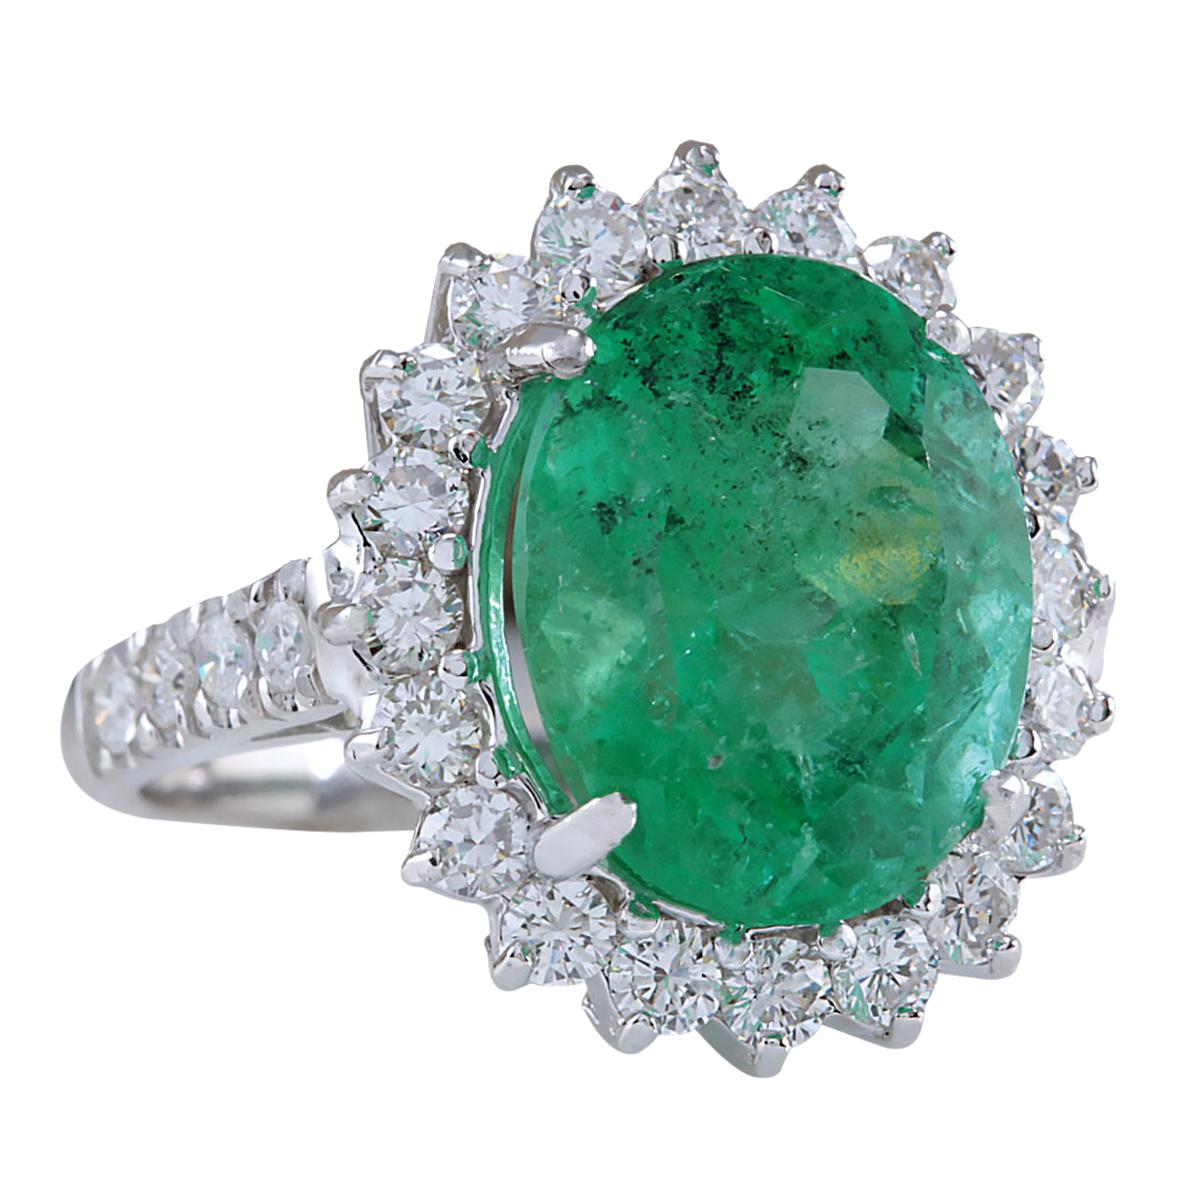 Introducing a true masterpiece of timeless elegance, this Emerald Diamond Ring radiates opulence and sophistication. Crafted in luxurious 14K White Gold, this ring boasts a mesmerizing 8.93 carats of celestial beauty.

At its heart lies a